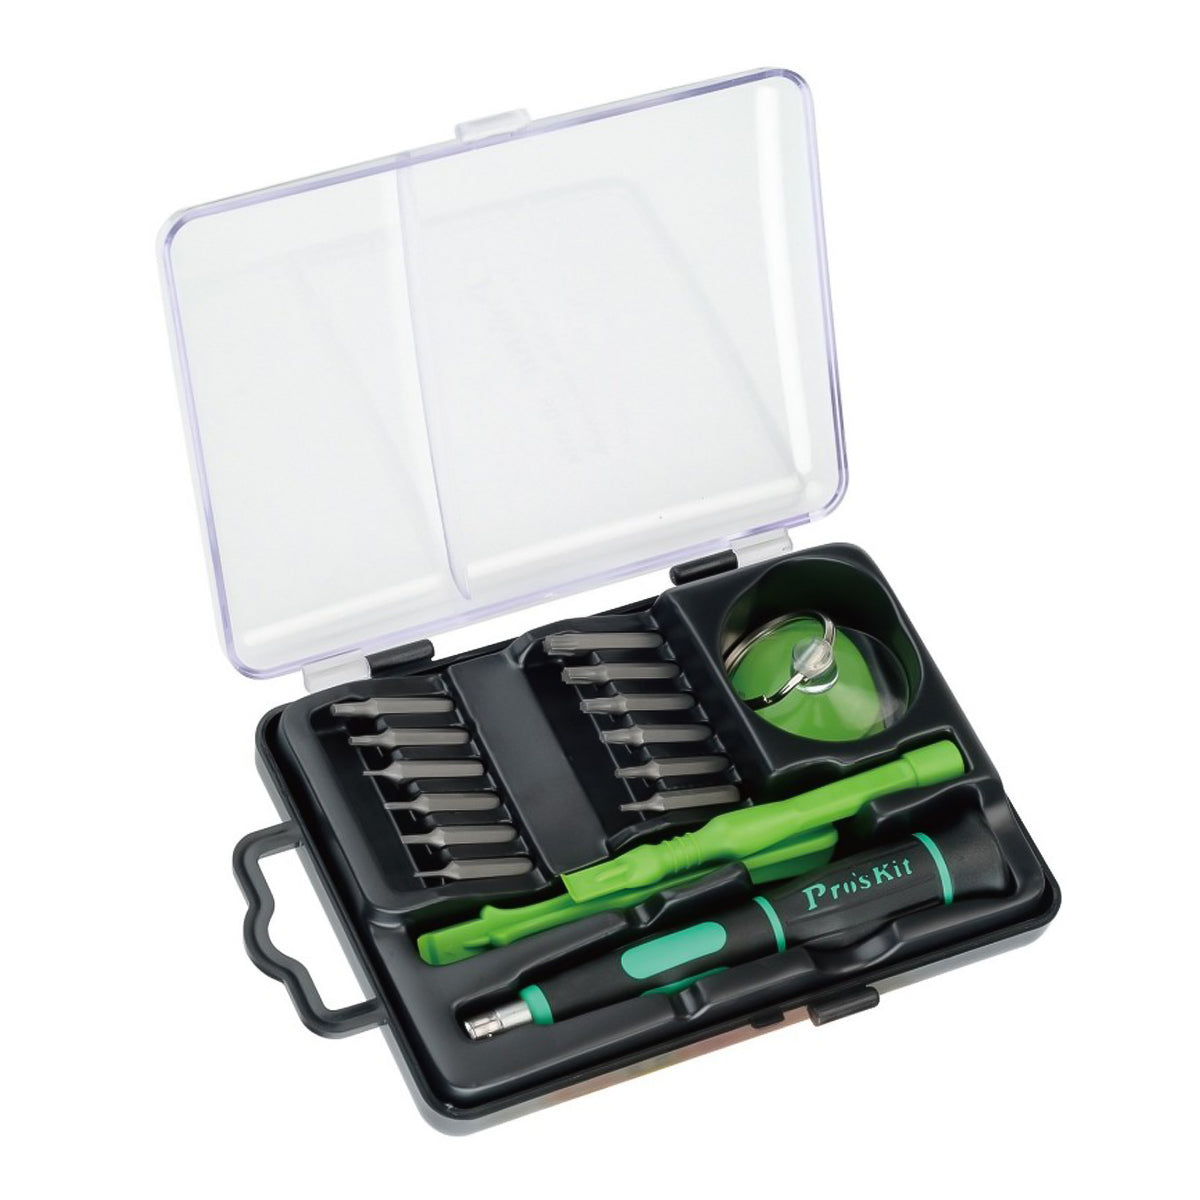 Pro'skit Set of 17 smartphone repair tools, toolbox for Apple devices, screwdriver with interchangeable precision tips